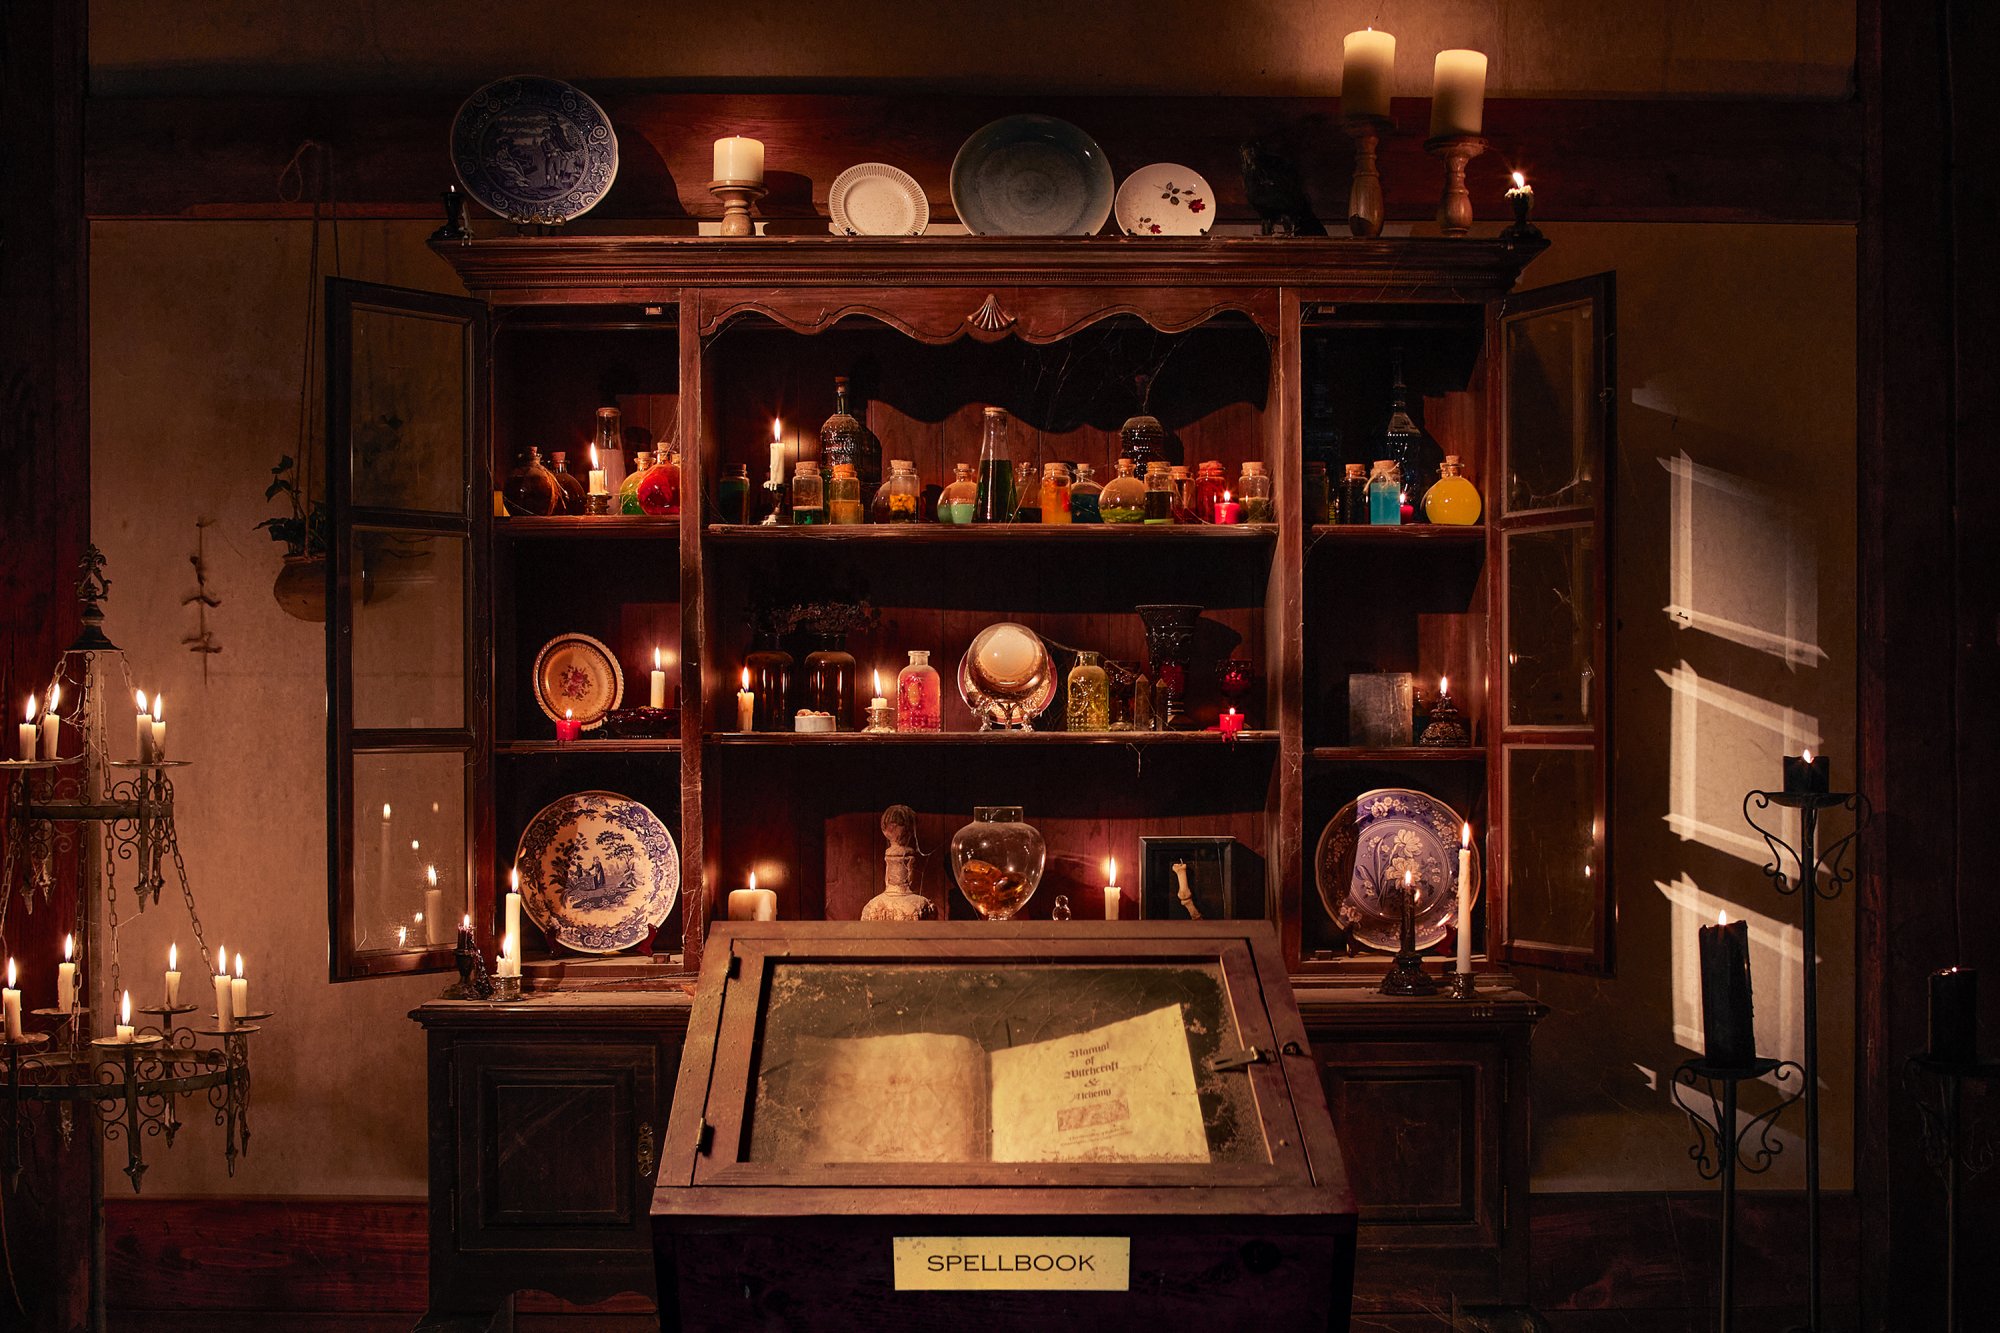 A cupboard and spellbook.